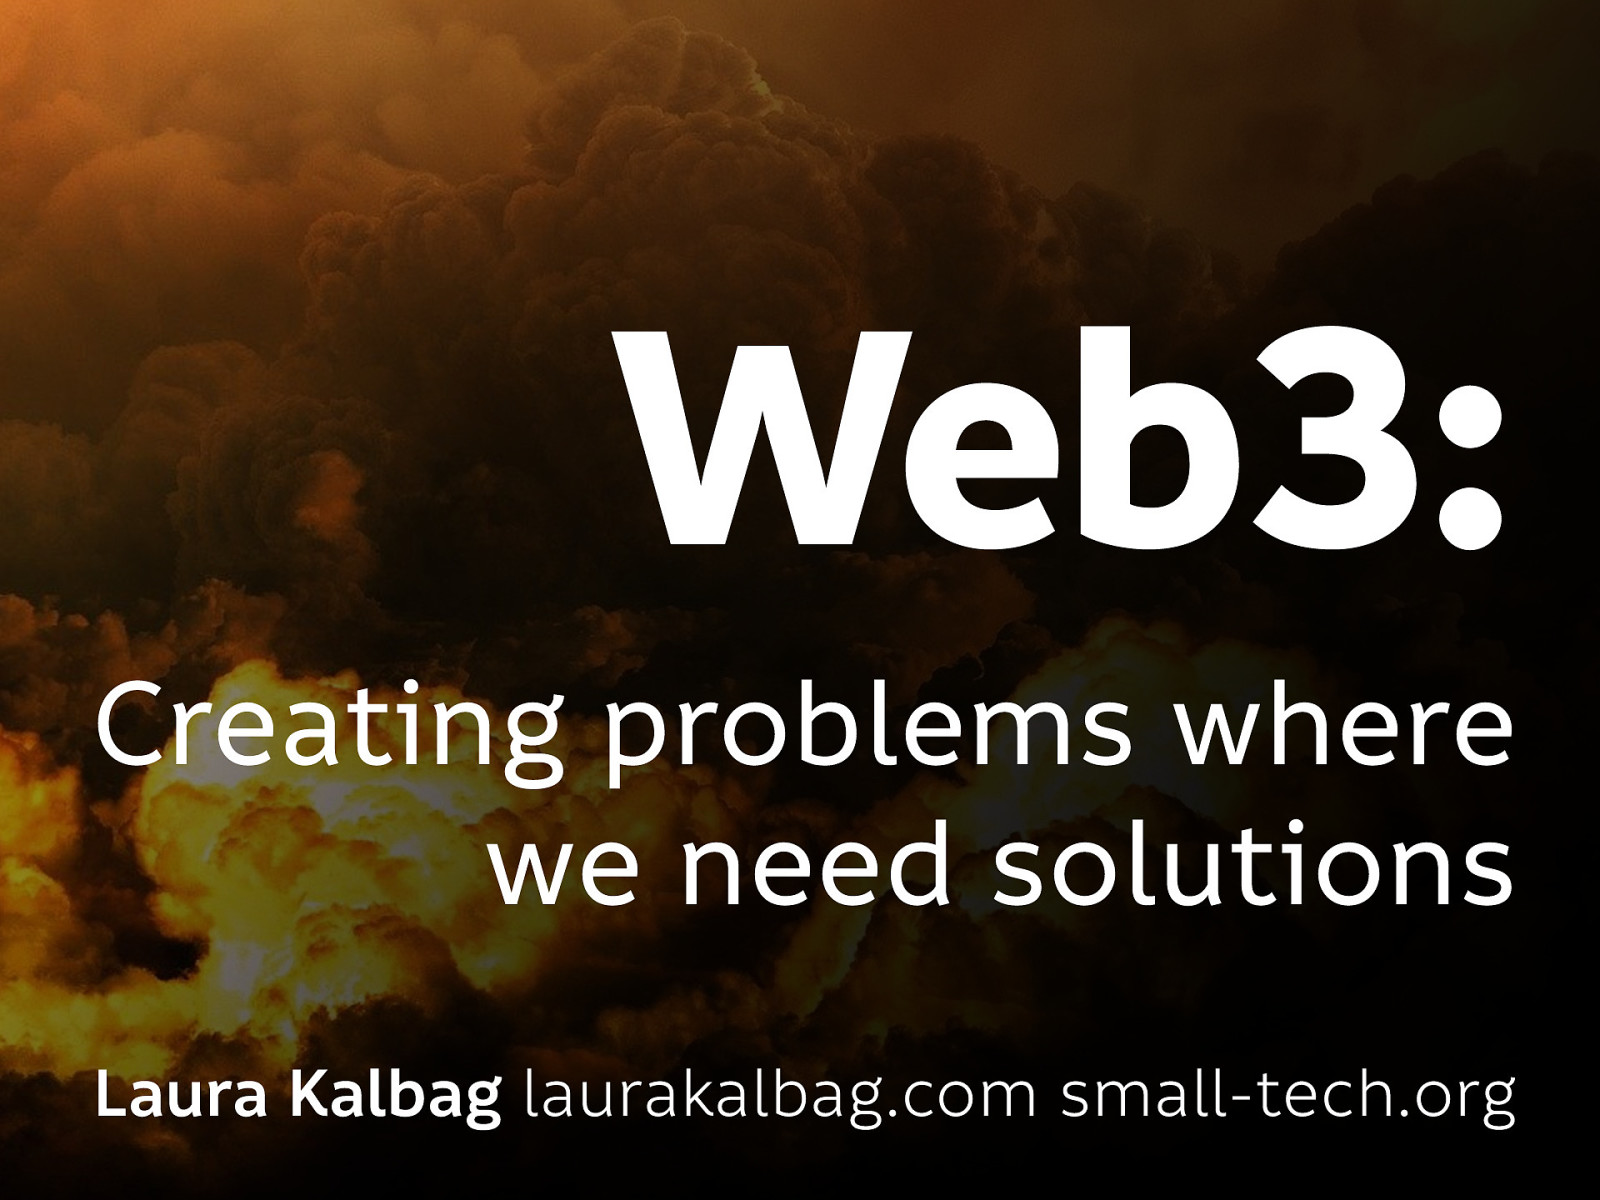 Web3: Creating problems where we need solutions